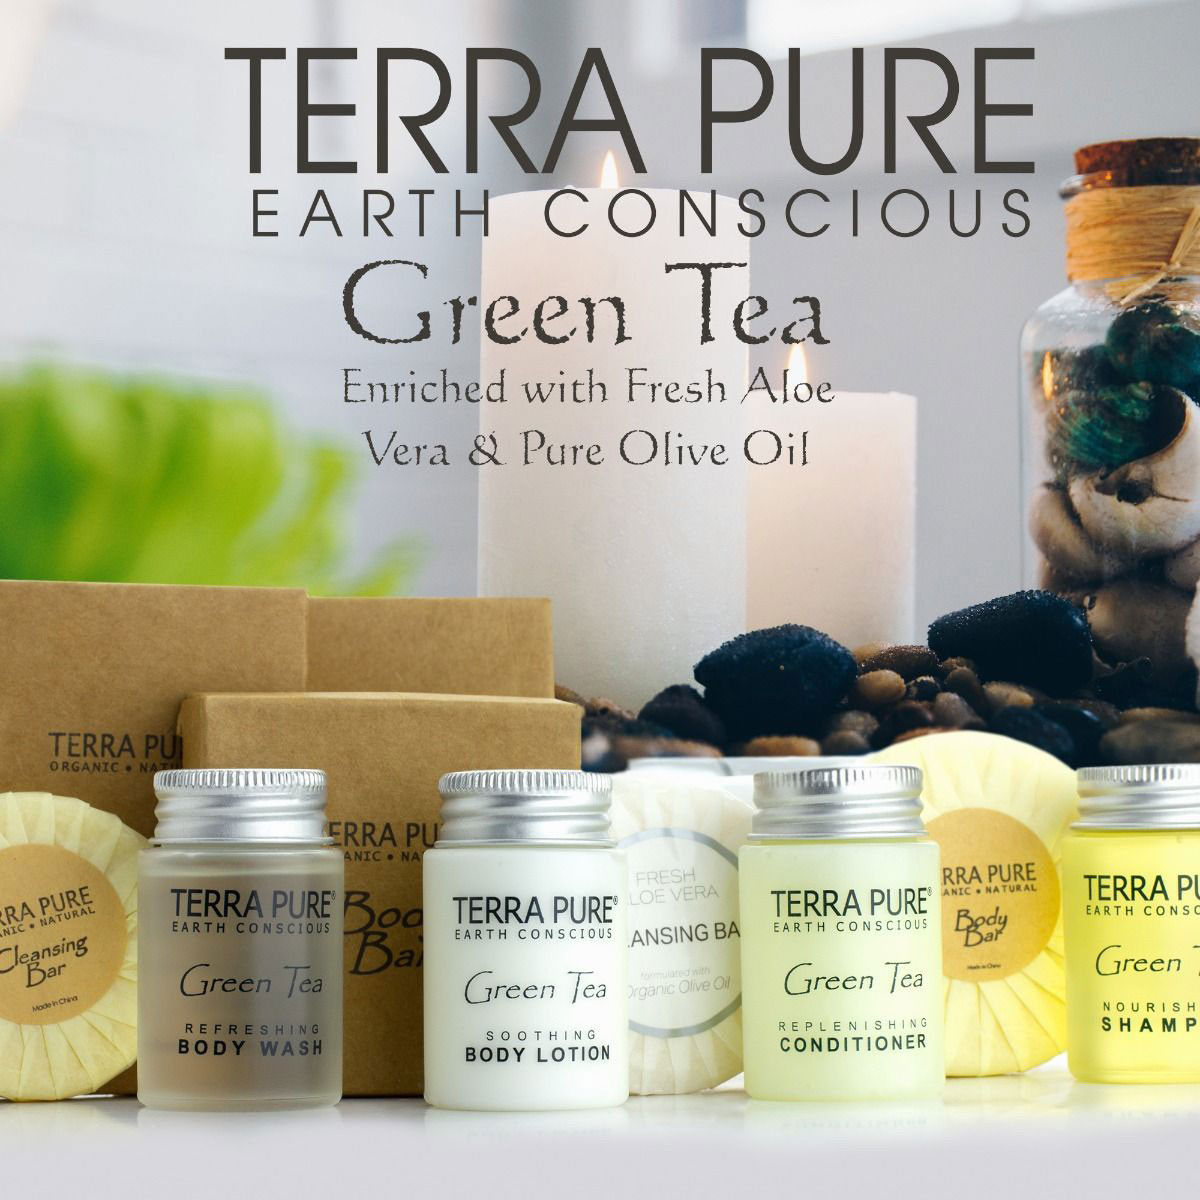 How will the light botanical fragrance of the TERRA PURE GREEN TEA Collection benefit you?